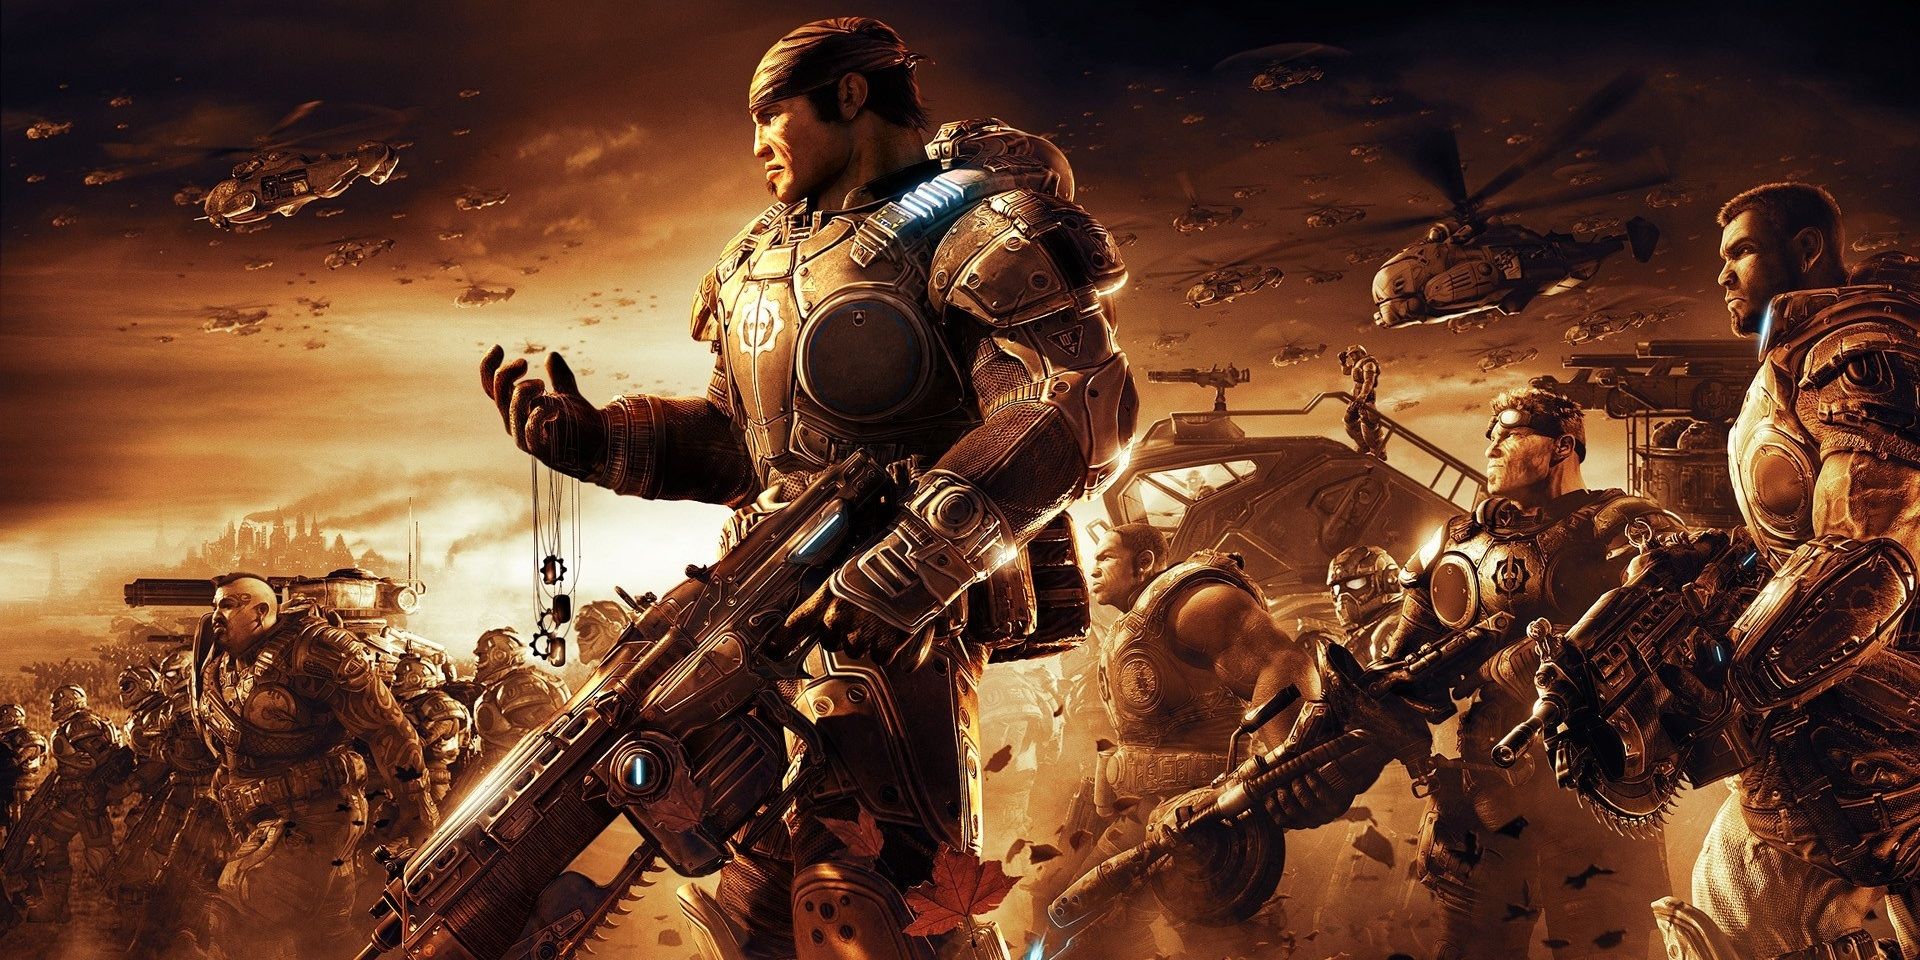 Gears of War Movie Updates Coming Soon, Teases Producer